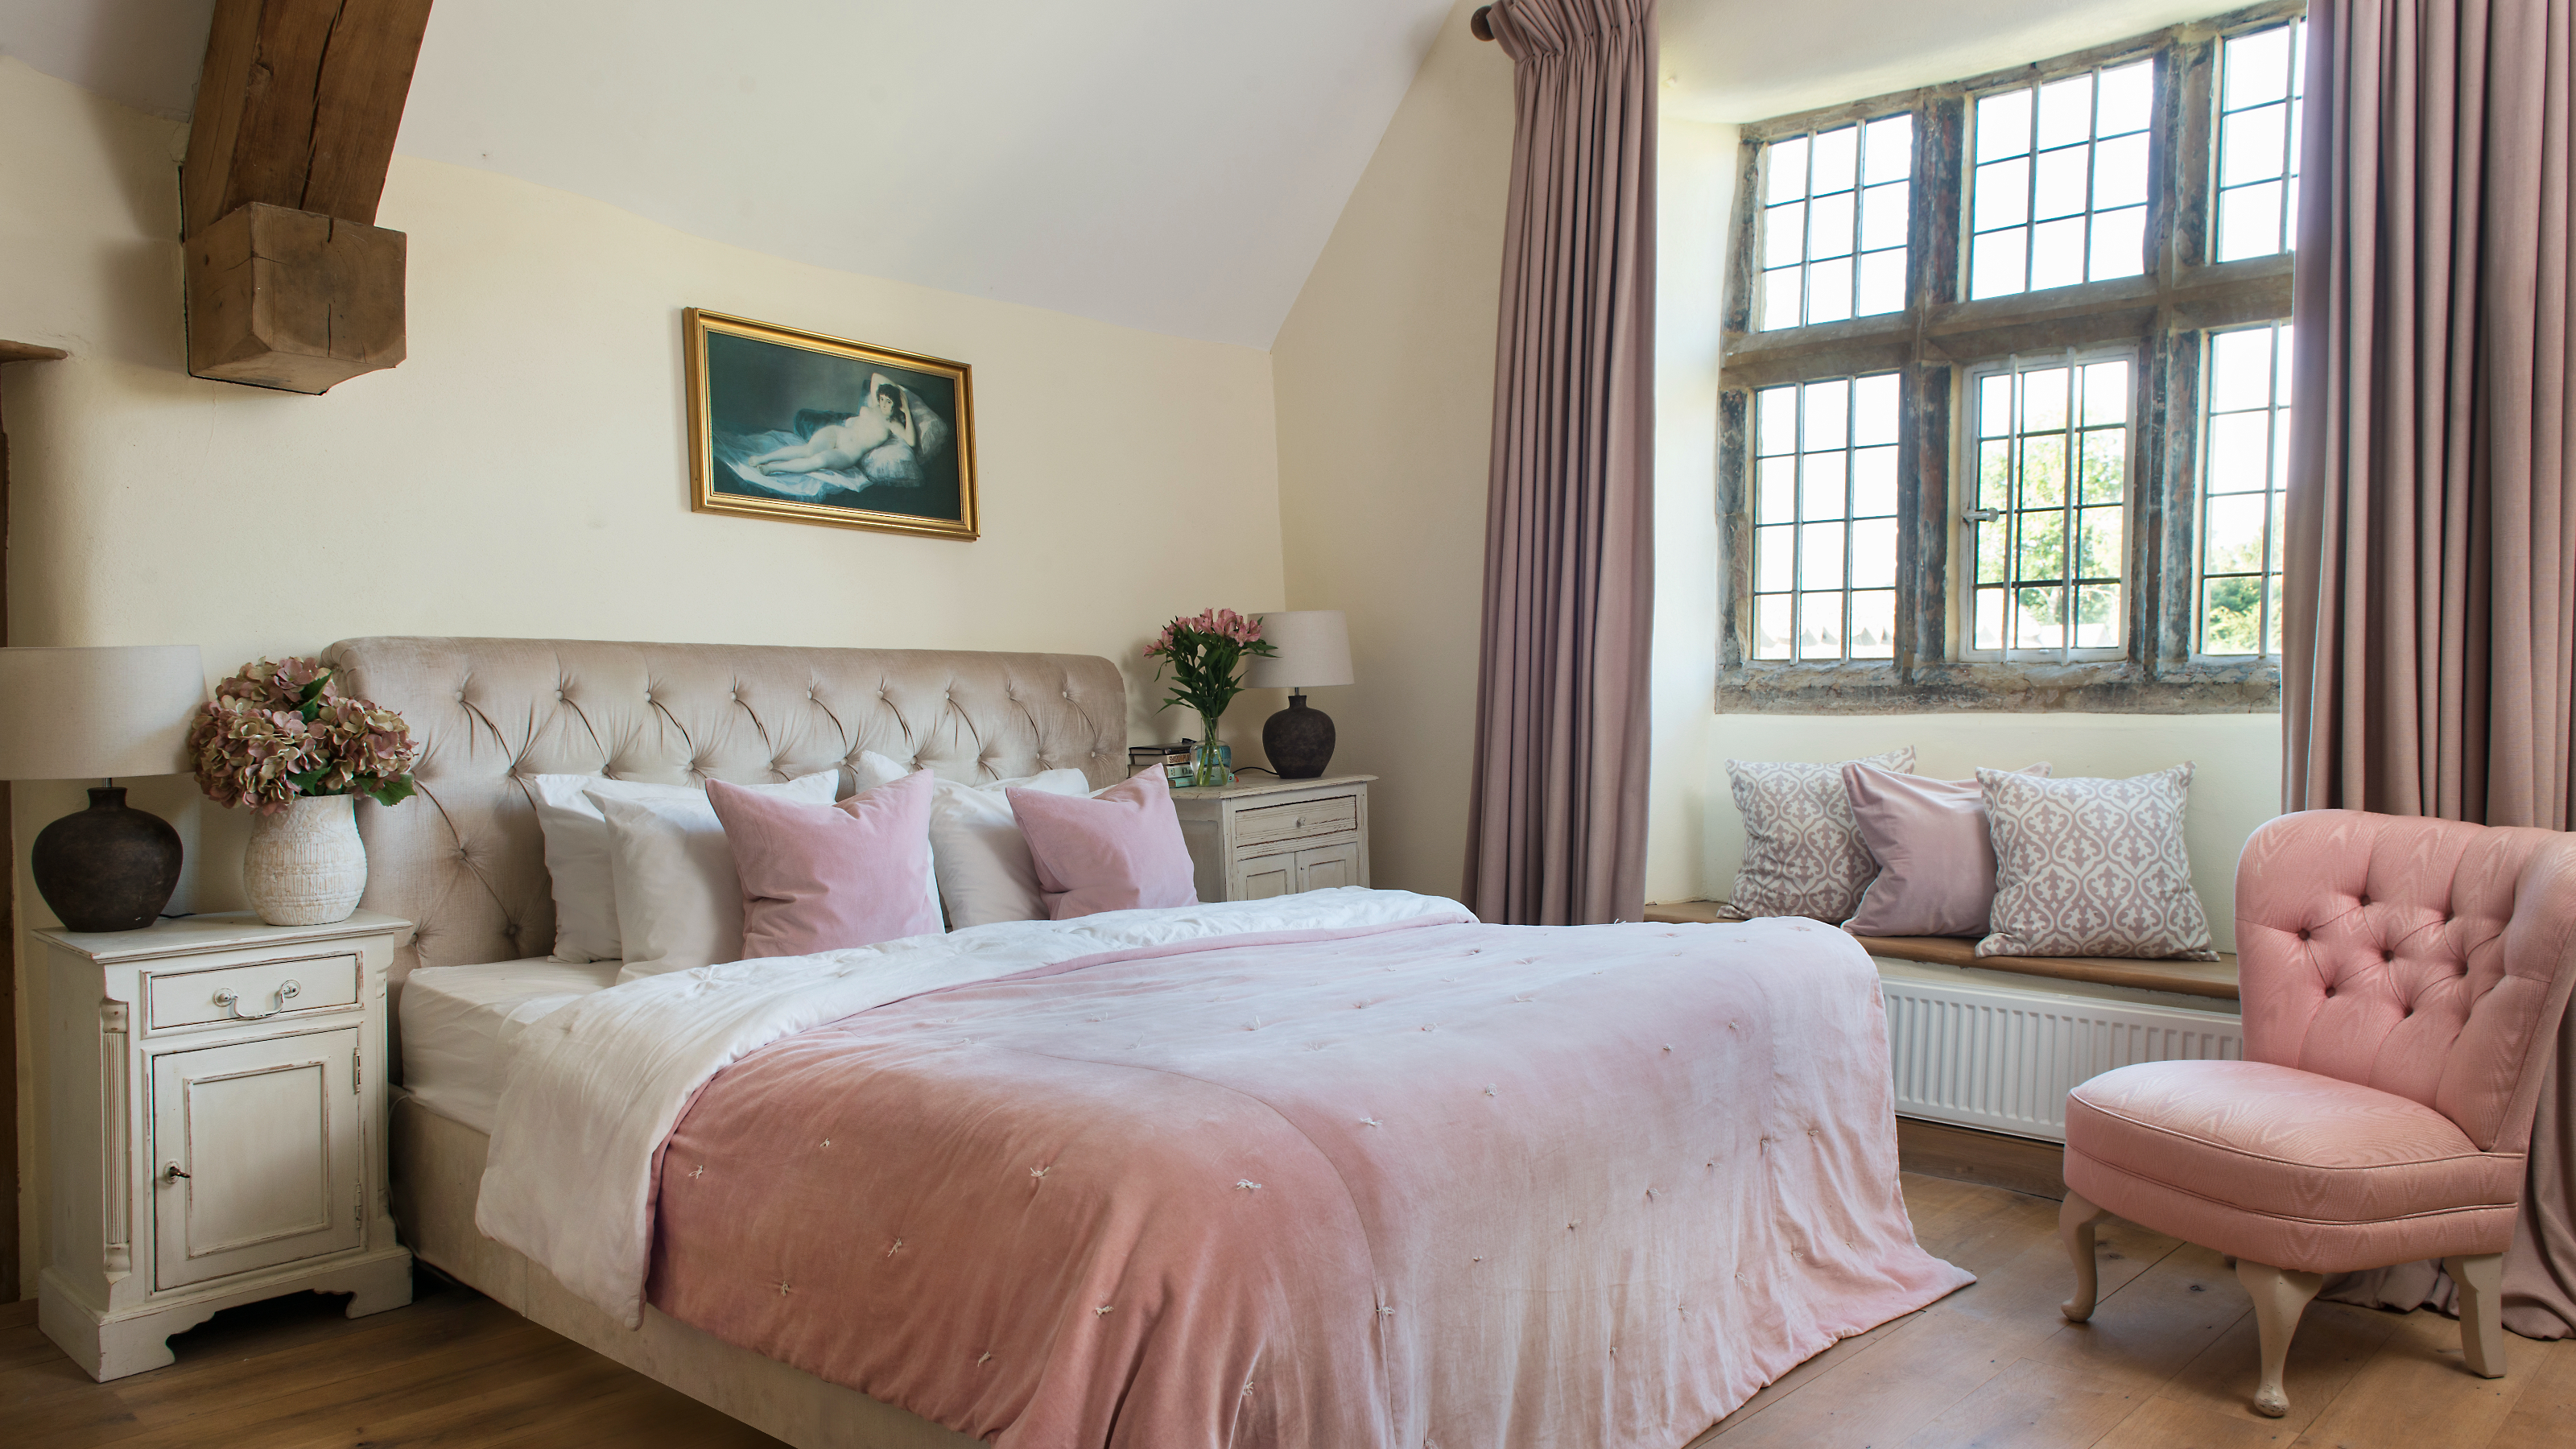 Grey and pink bedroom ideas - 10 ways to pull off this beautiful